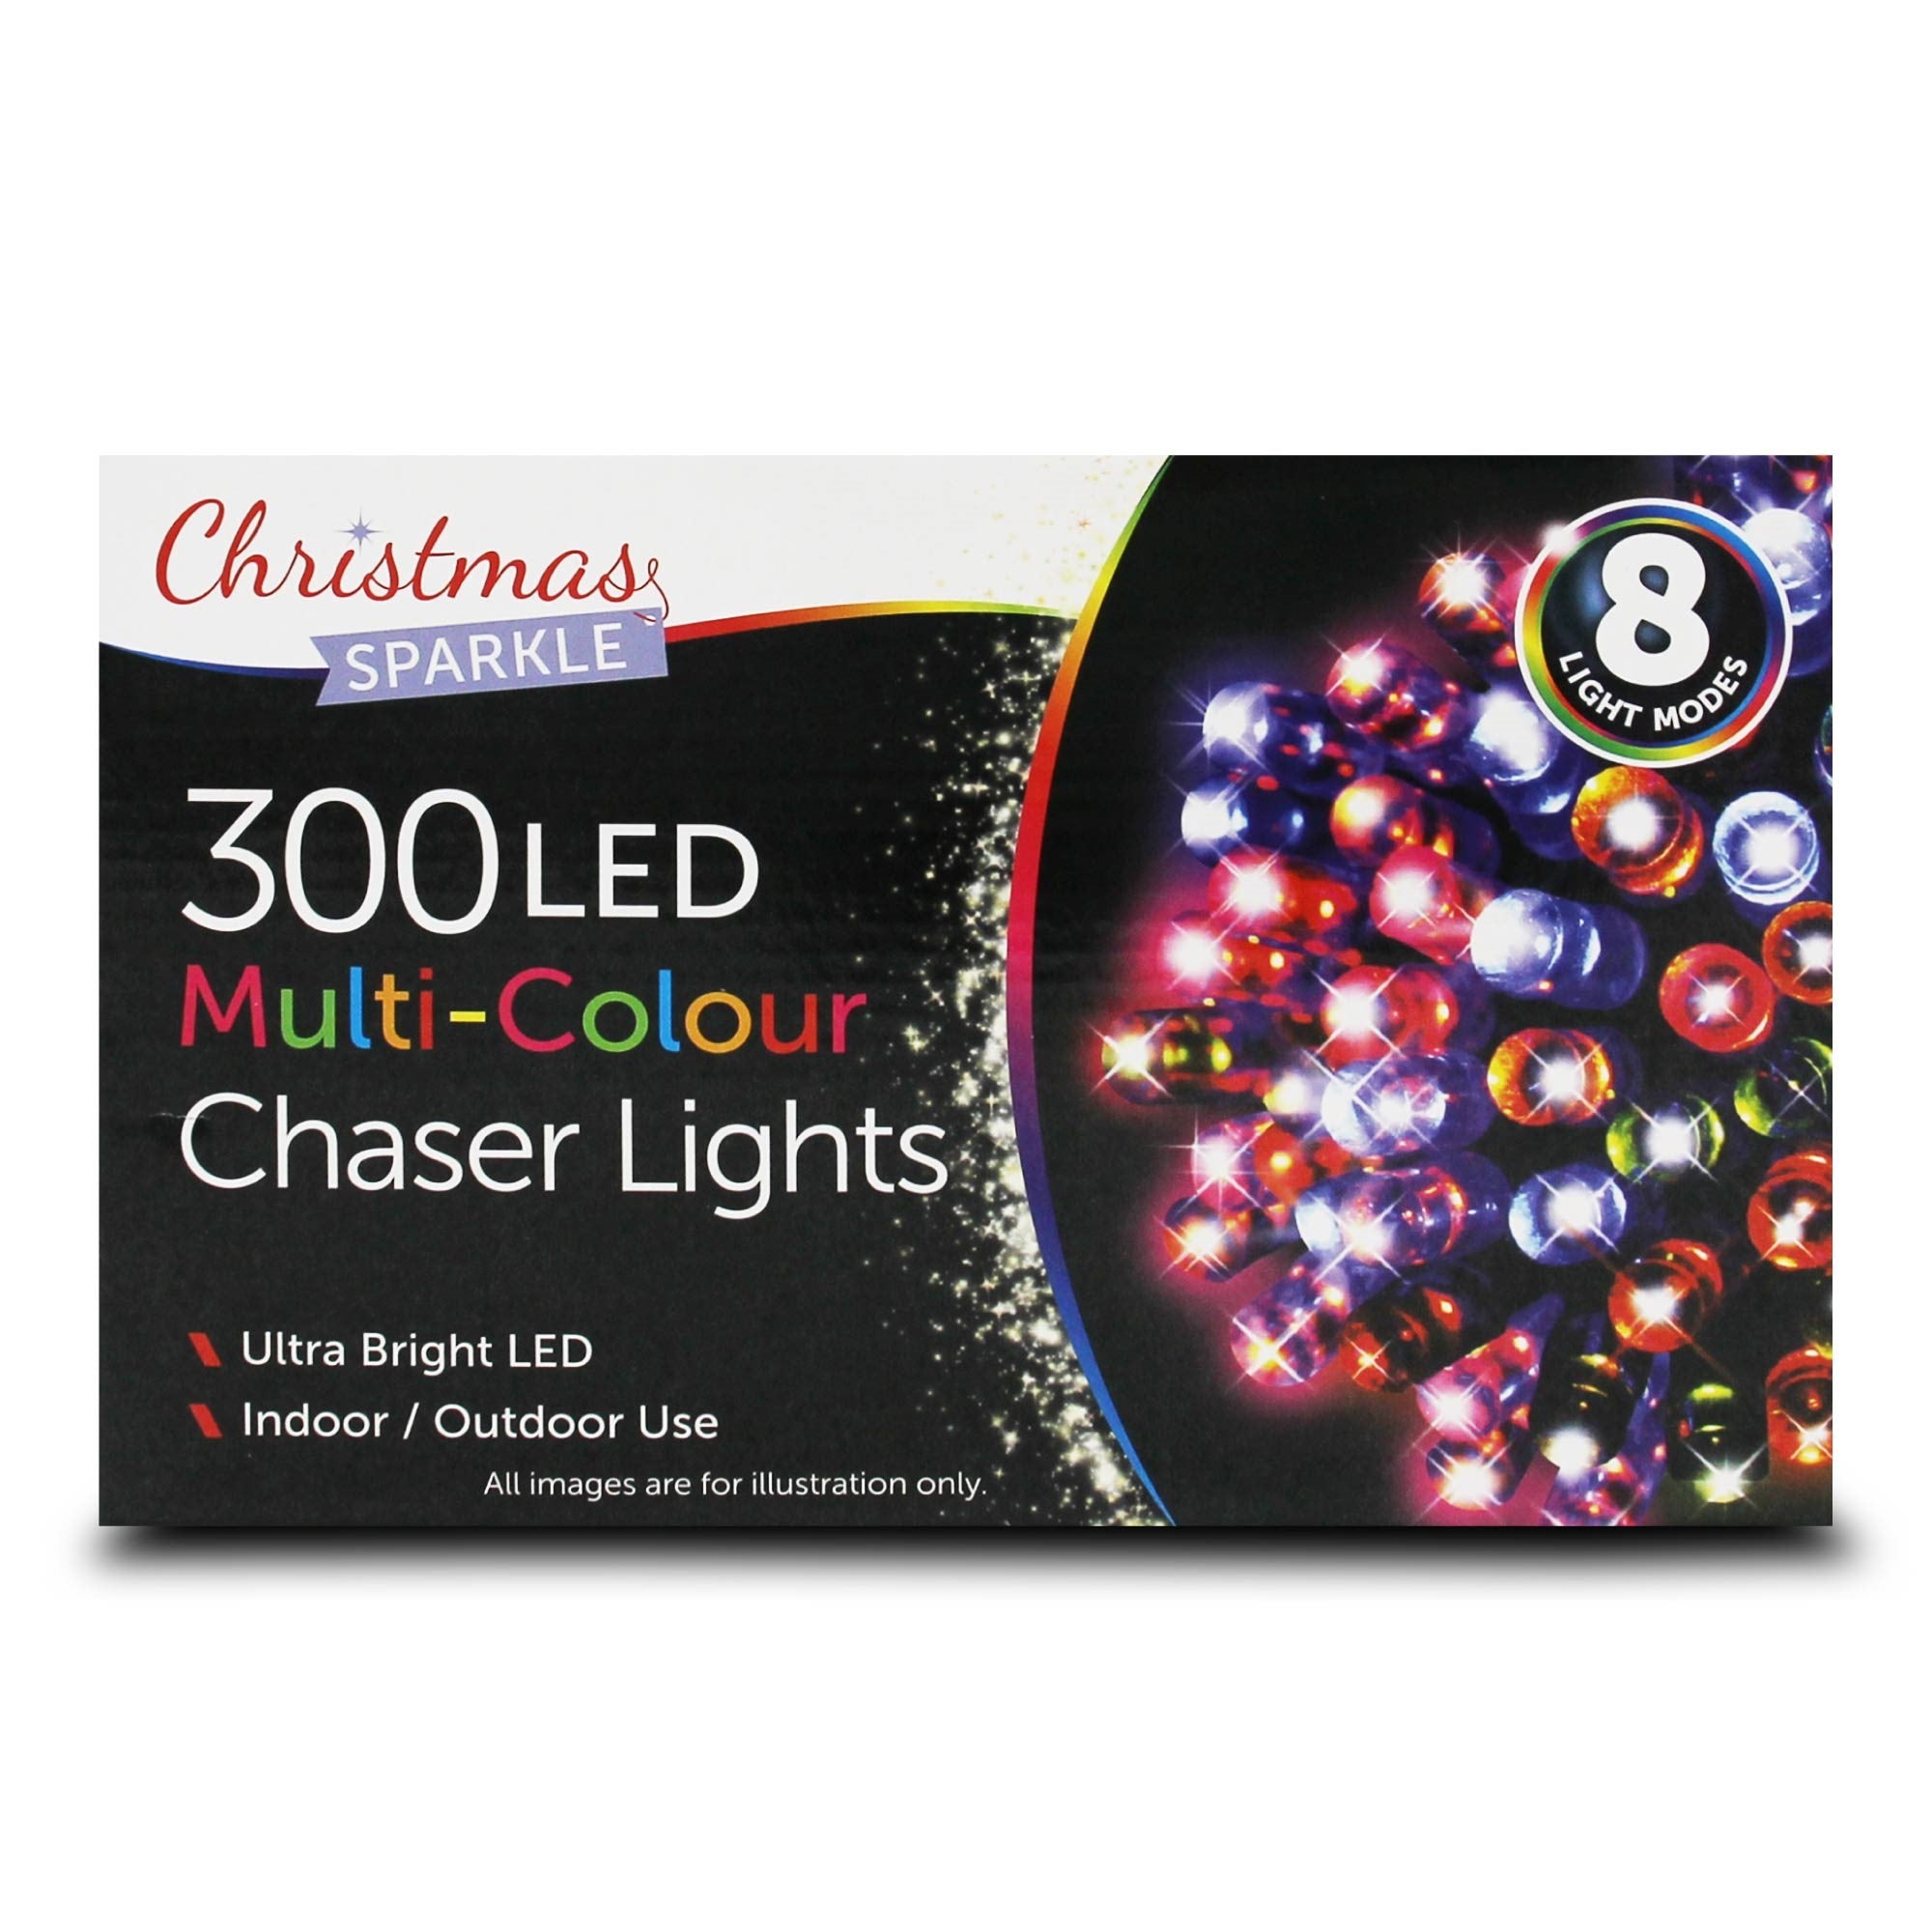 Christmas Sparkle Indoor and Outdoor Chaser Lights x 300 Multi Colour LEDs - Mains Operated  | TJ Hughes